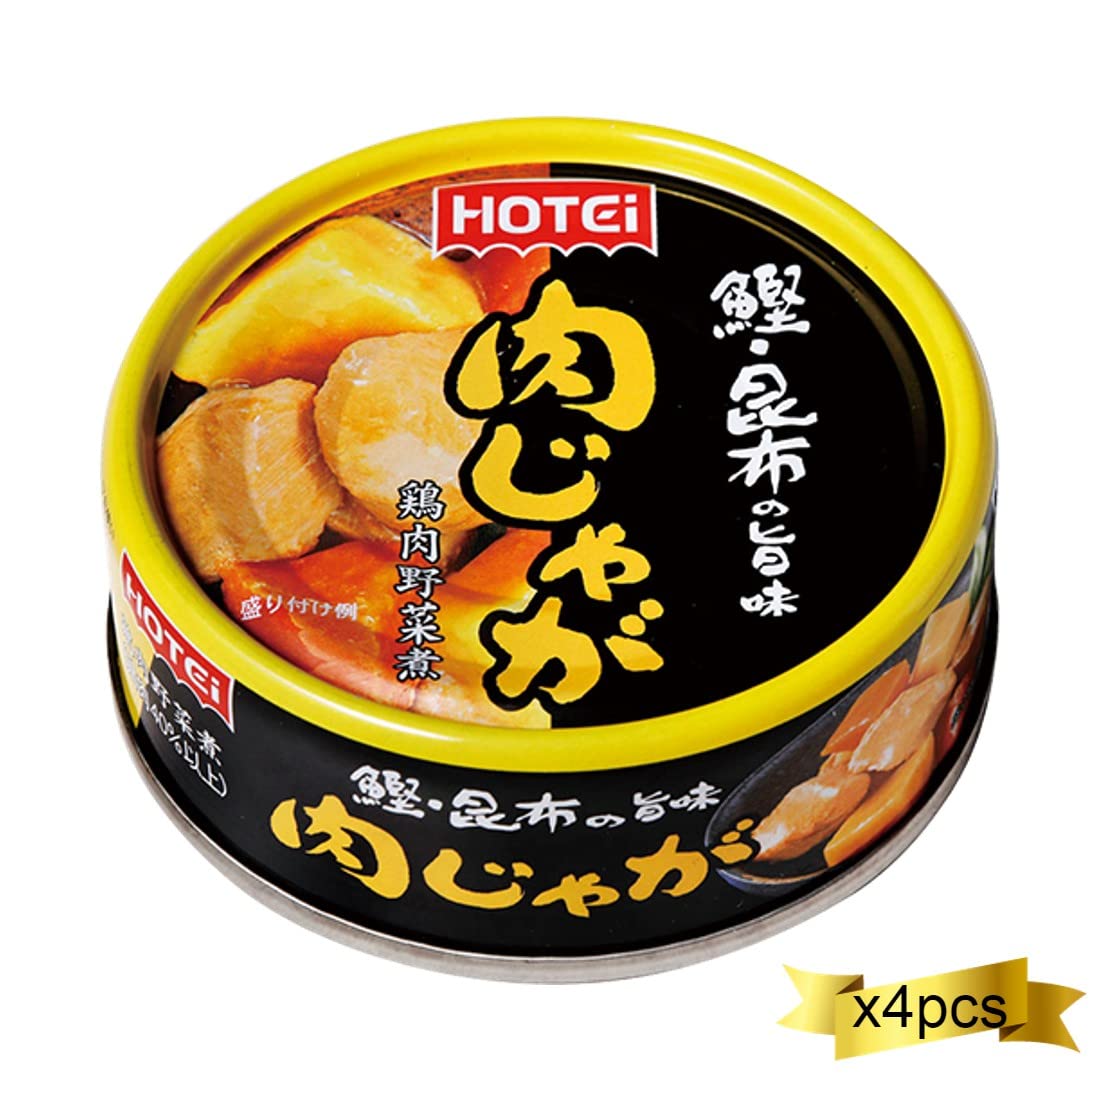 "Meat and Potatoes" Side Dishes 2.5oz 4pcs Japanese Canned Food Hotei Foods Ninjapo